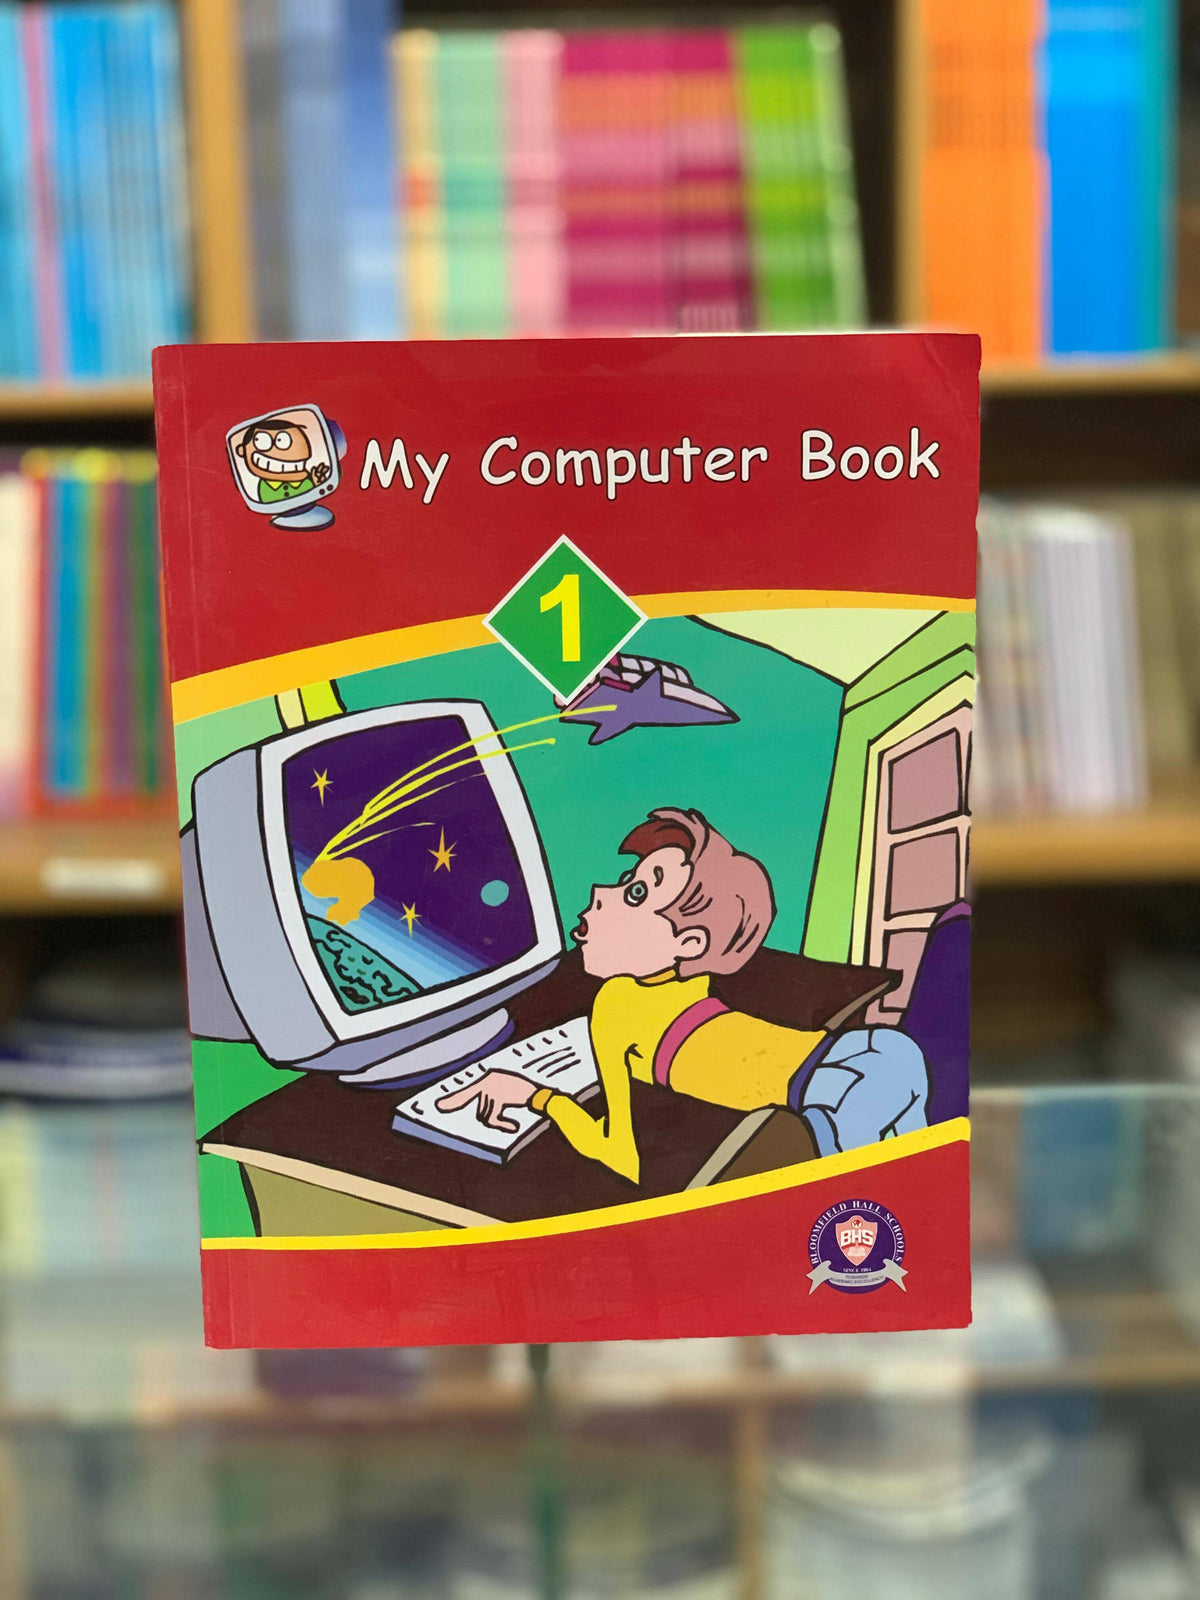 My Computer Book 1 By BHS (SUPPLEMENTARY MATERIAL) - ValueBox